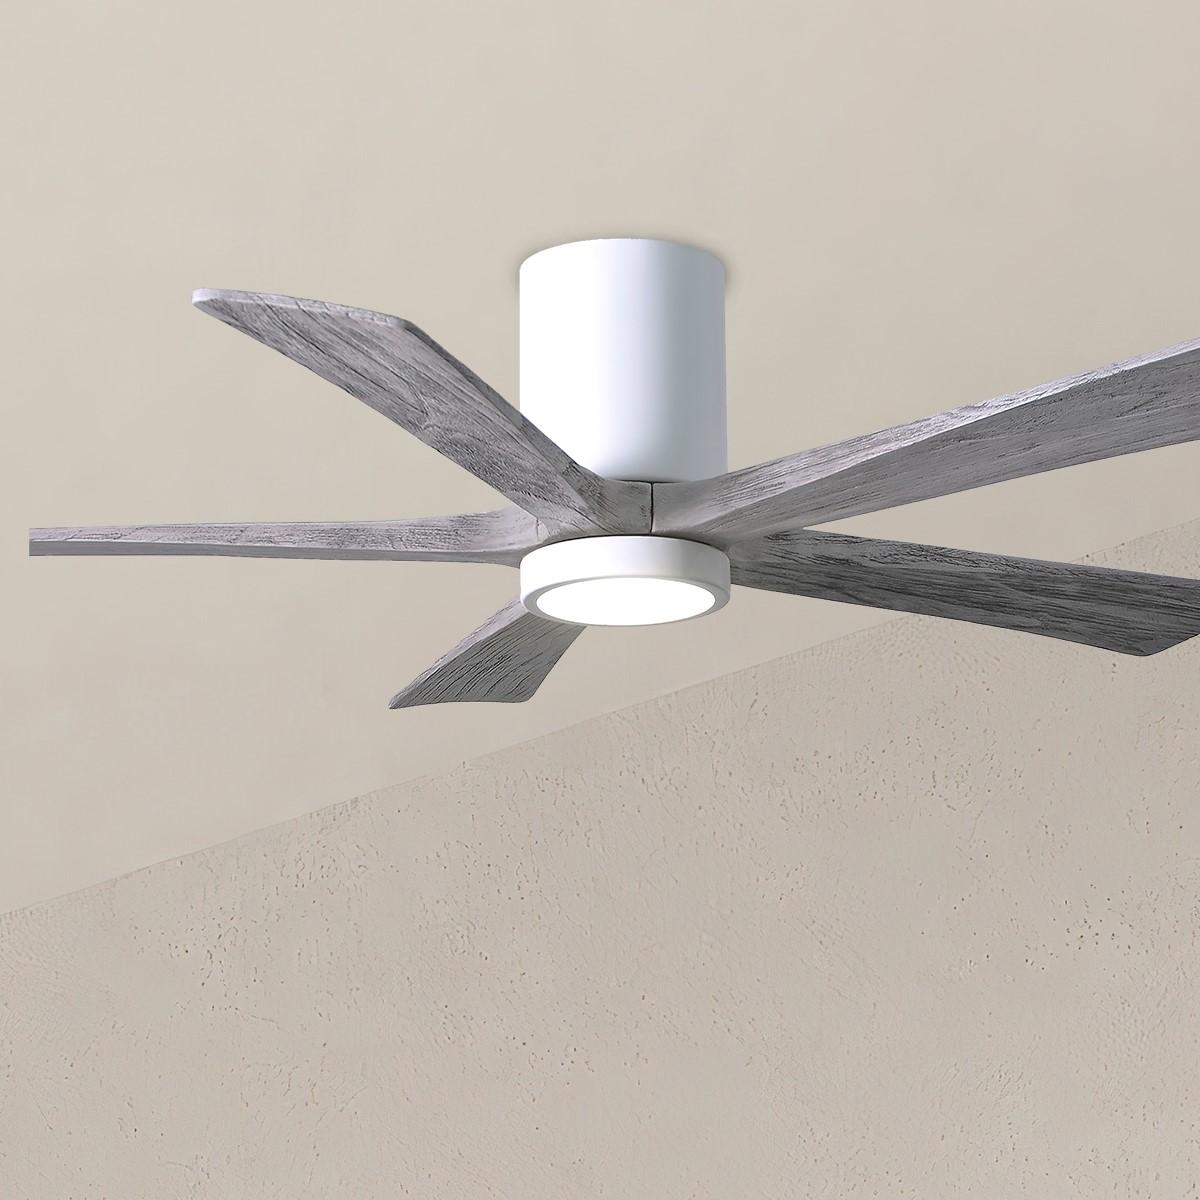 Irene 52 Inch Modern Outdoor Ceiling Fan With Light, Wall And Remote Control Included